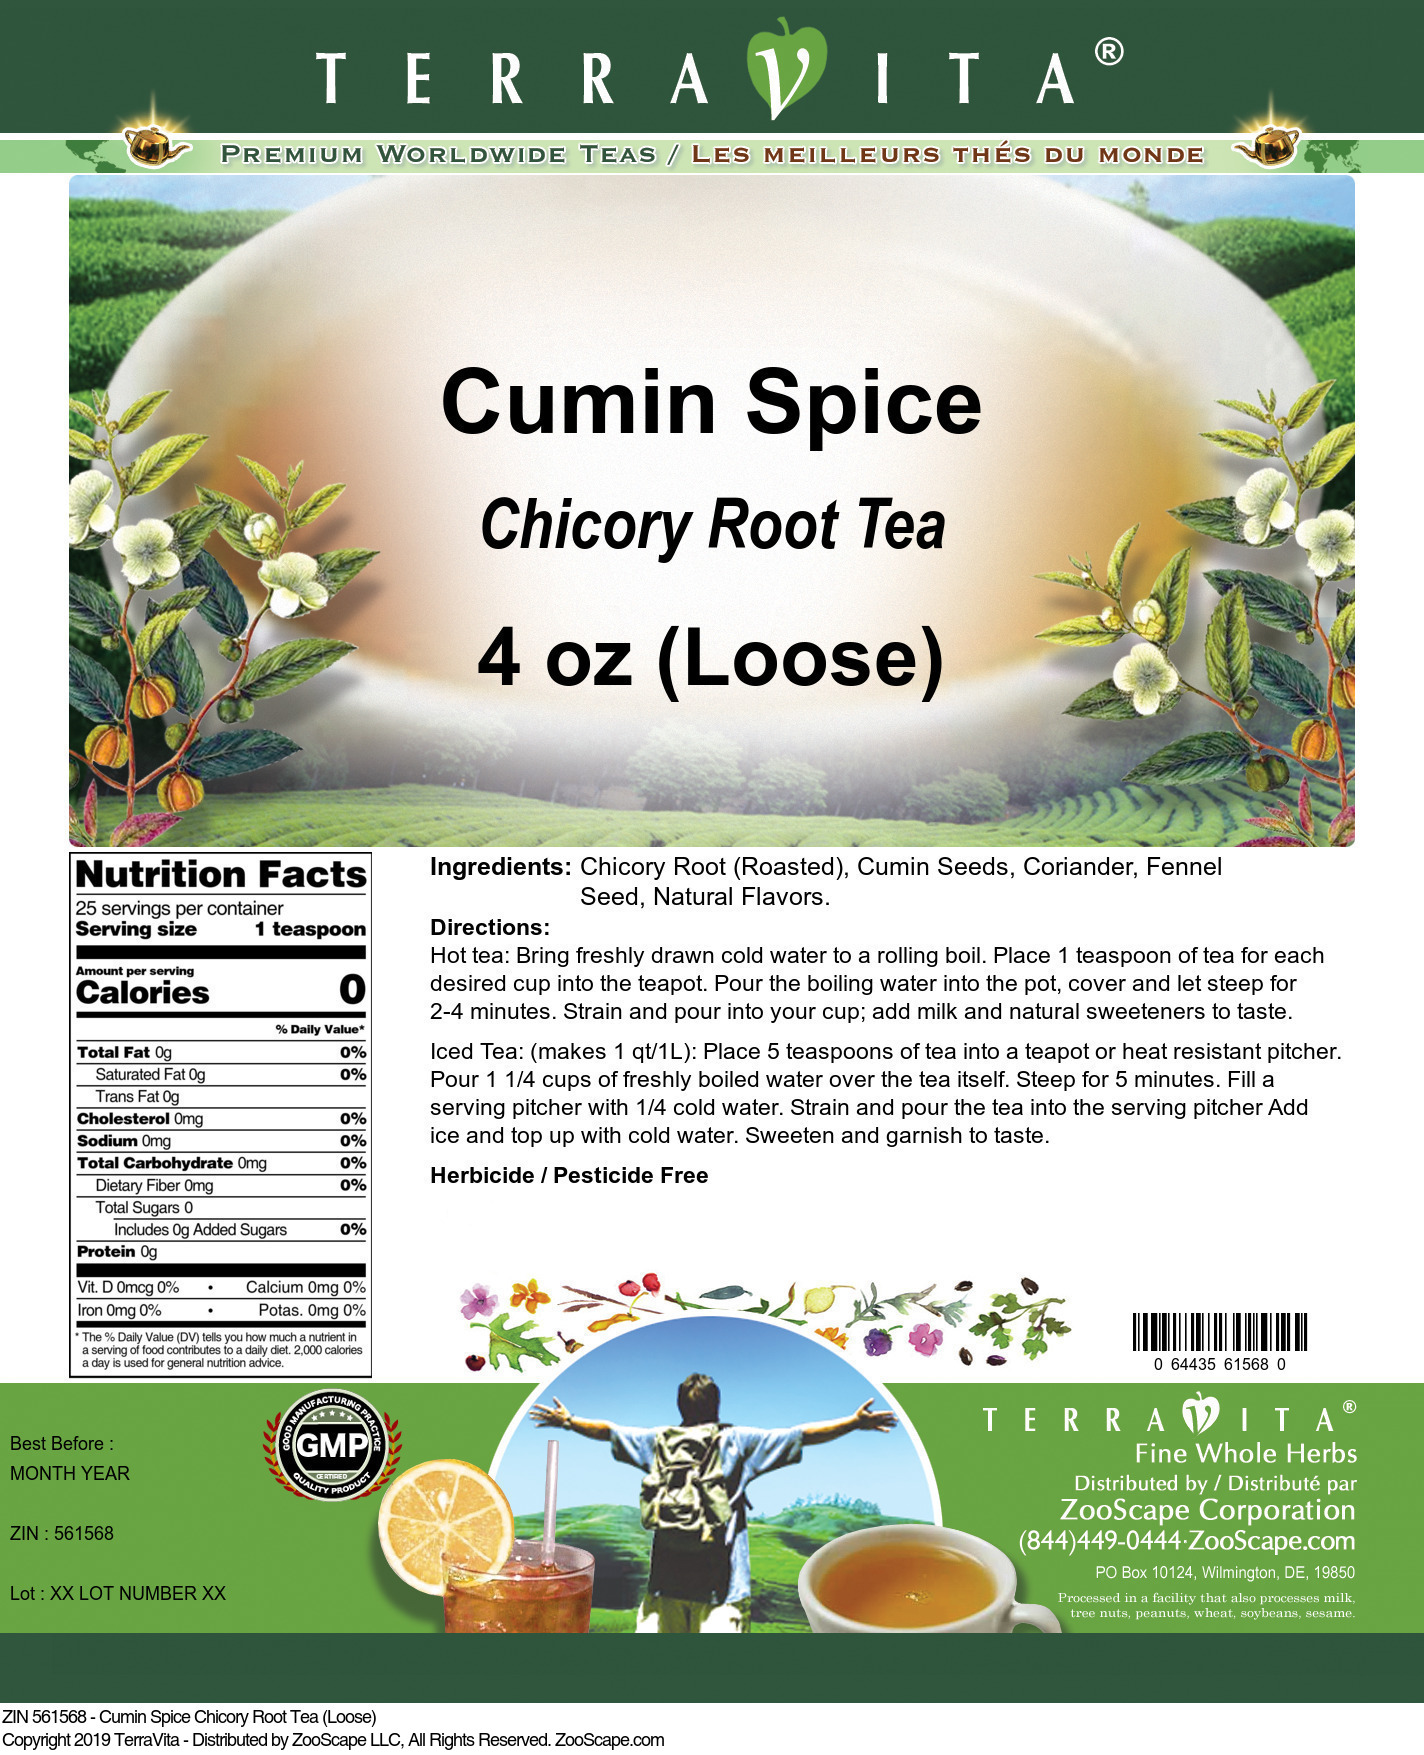 Cumin Spice Chicory Root Tea (Loose) - Label